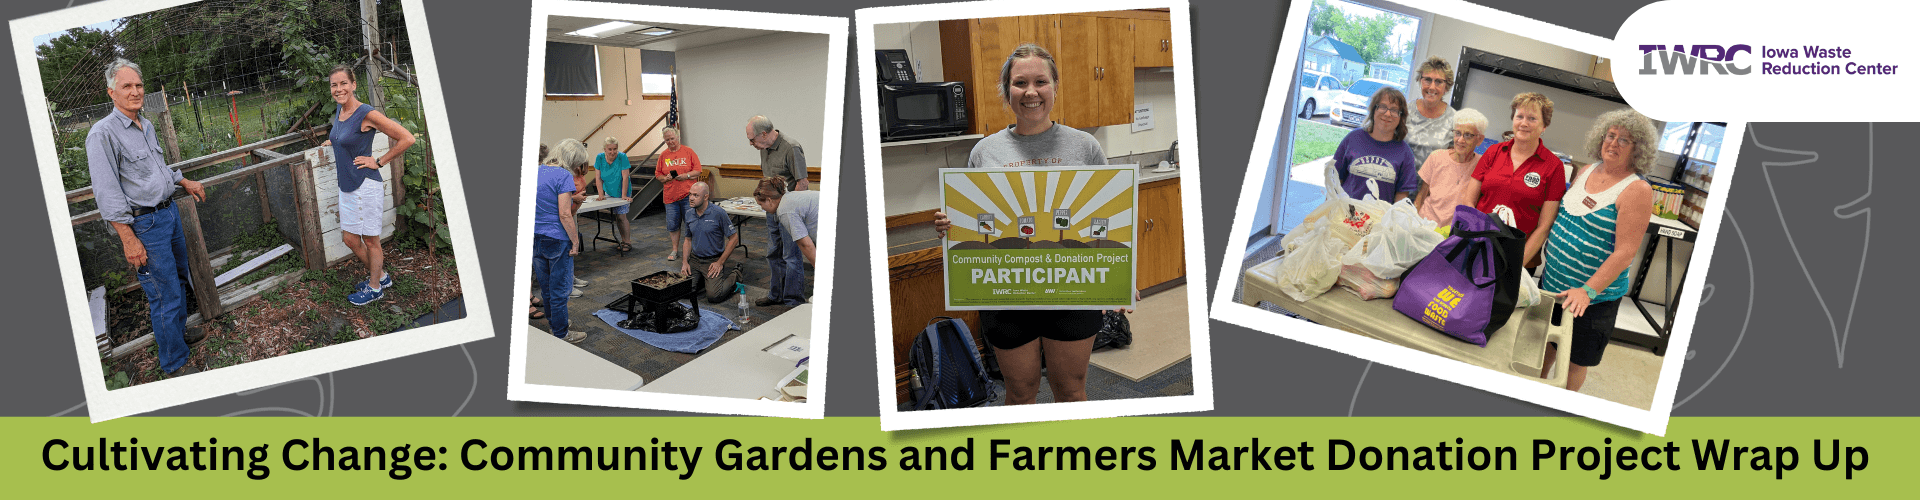 Cultivating Change: Community Gardens and Farmers Market Donation Project Wrap Up Blog header and article. See what the IWRC has been up to this summer in three Iowa Communities